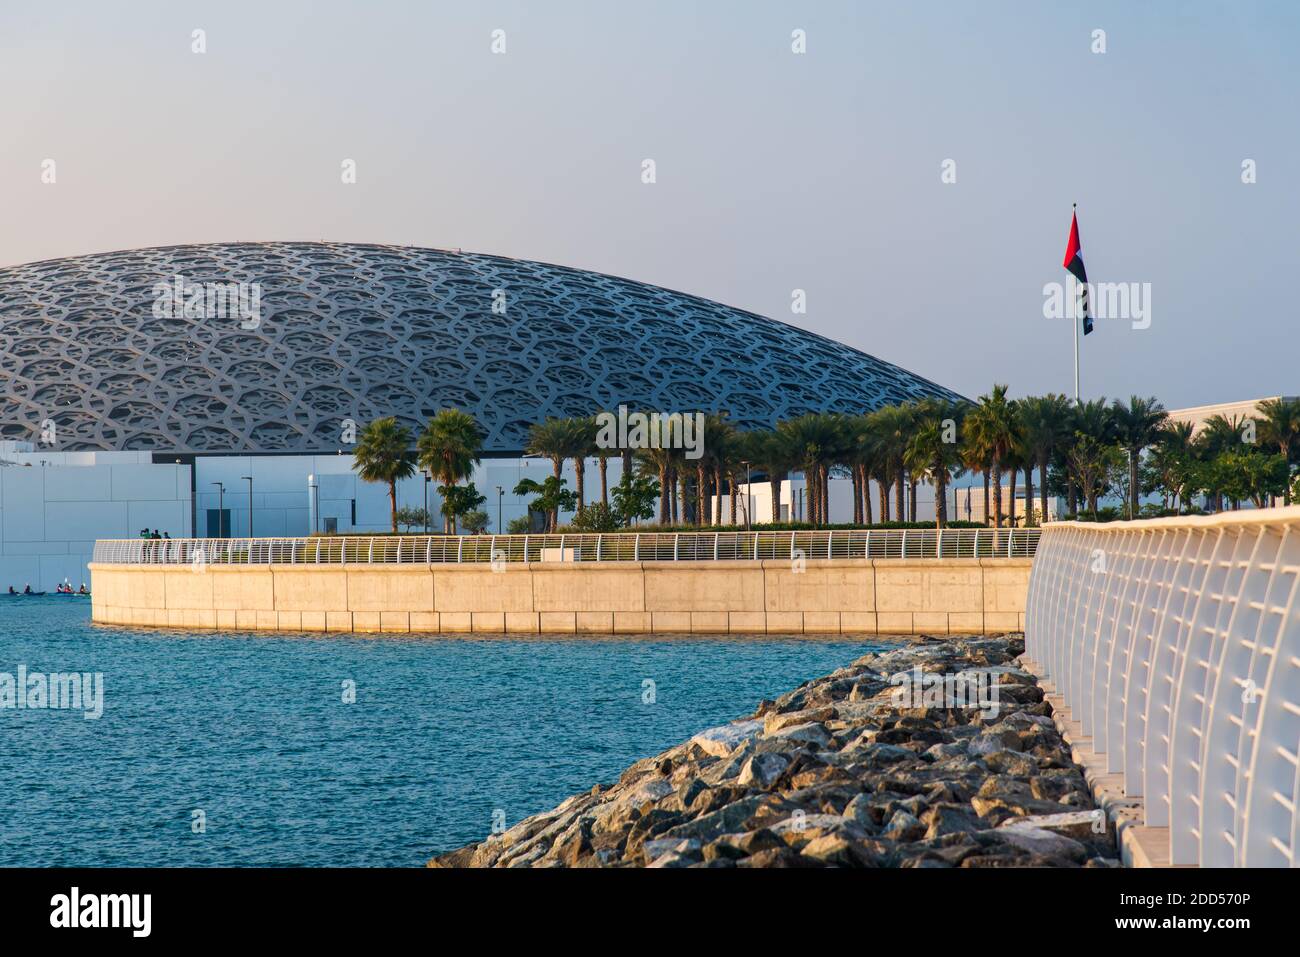 Abu Dhabi, United Arab Emirates - November 30, 2019: UAE flag and Louvre museum in Abu Dhabi exterior and entrance with characteristic architecture on Stock Photo